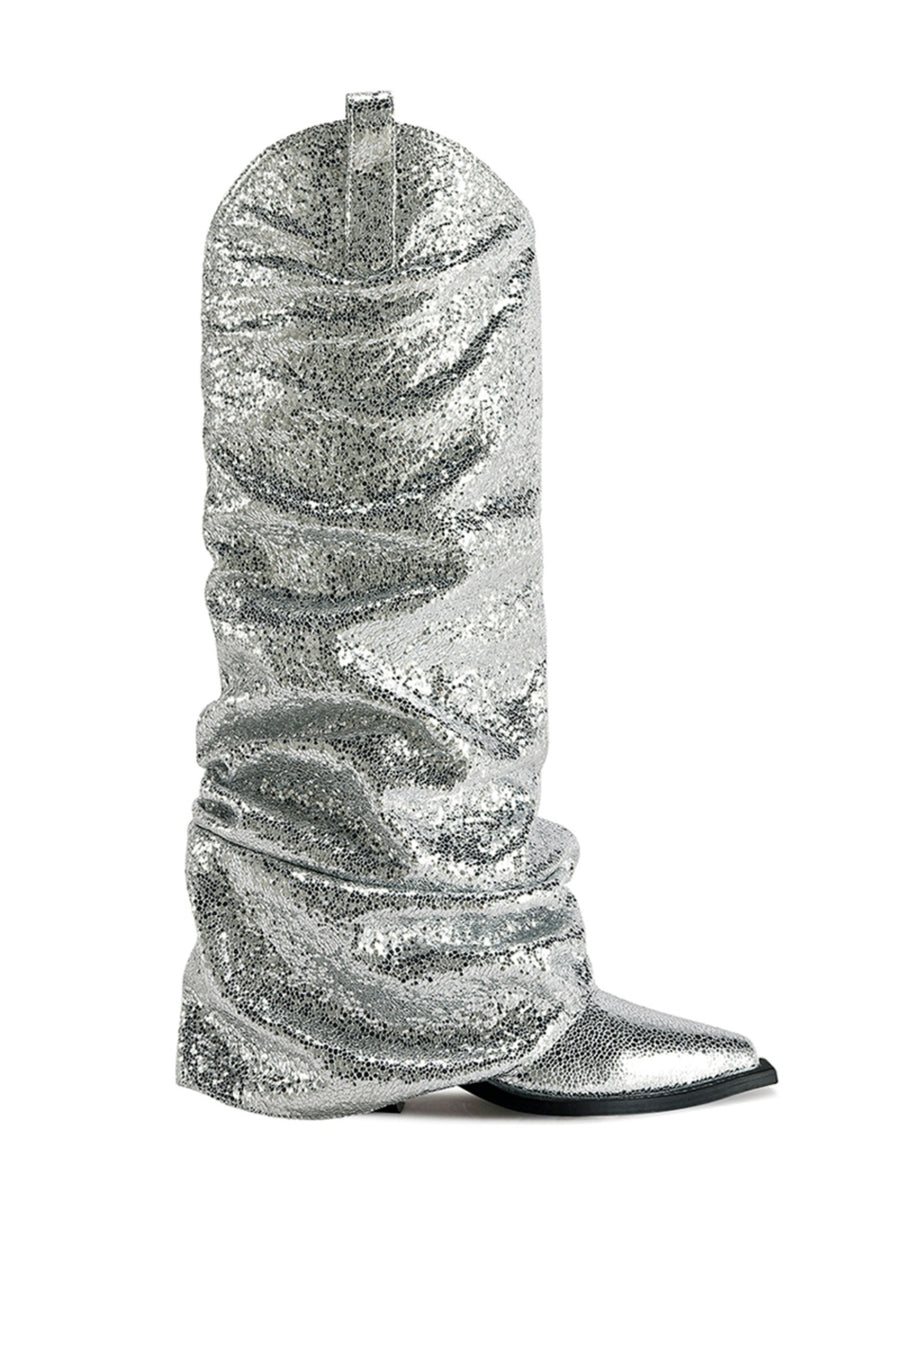 SHAWNEE-SILVER FOLD OVER WEDGE BOOT